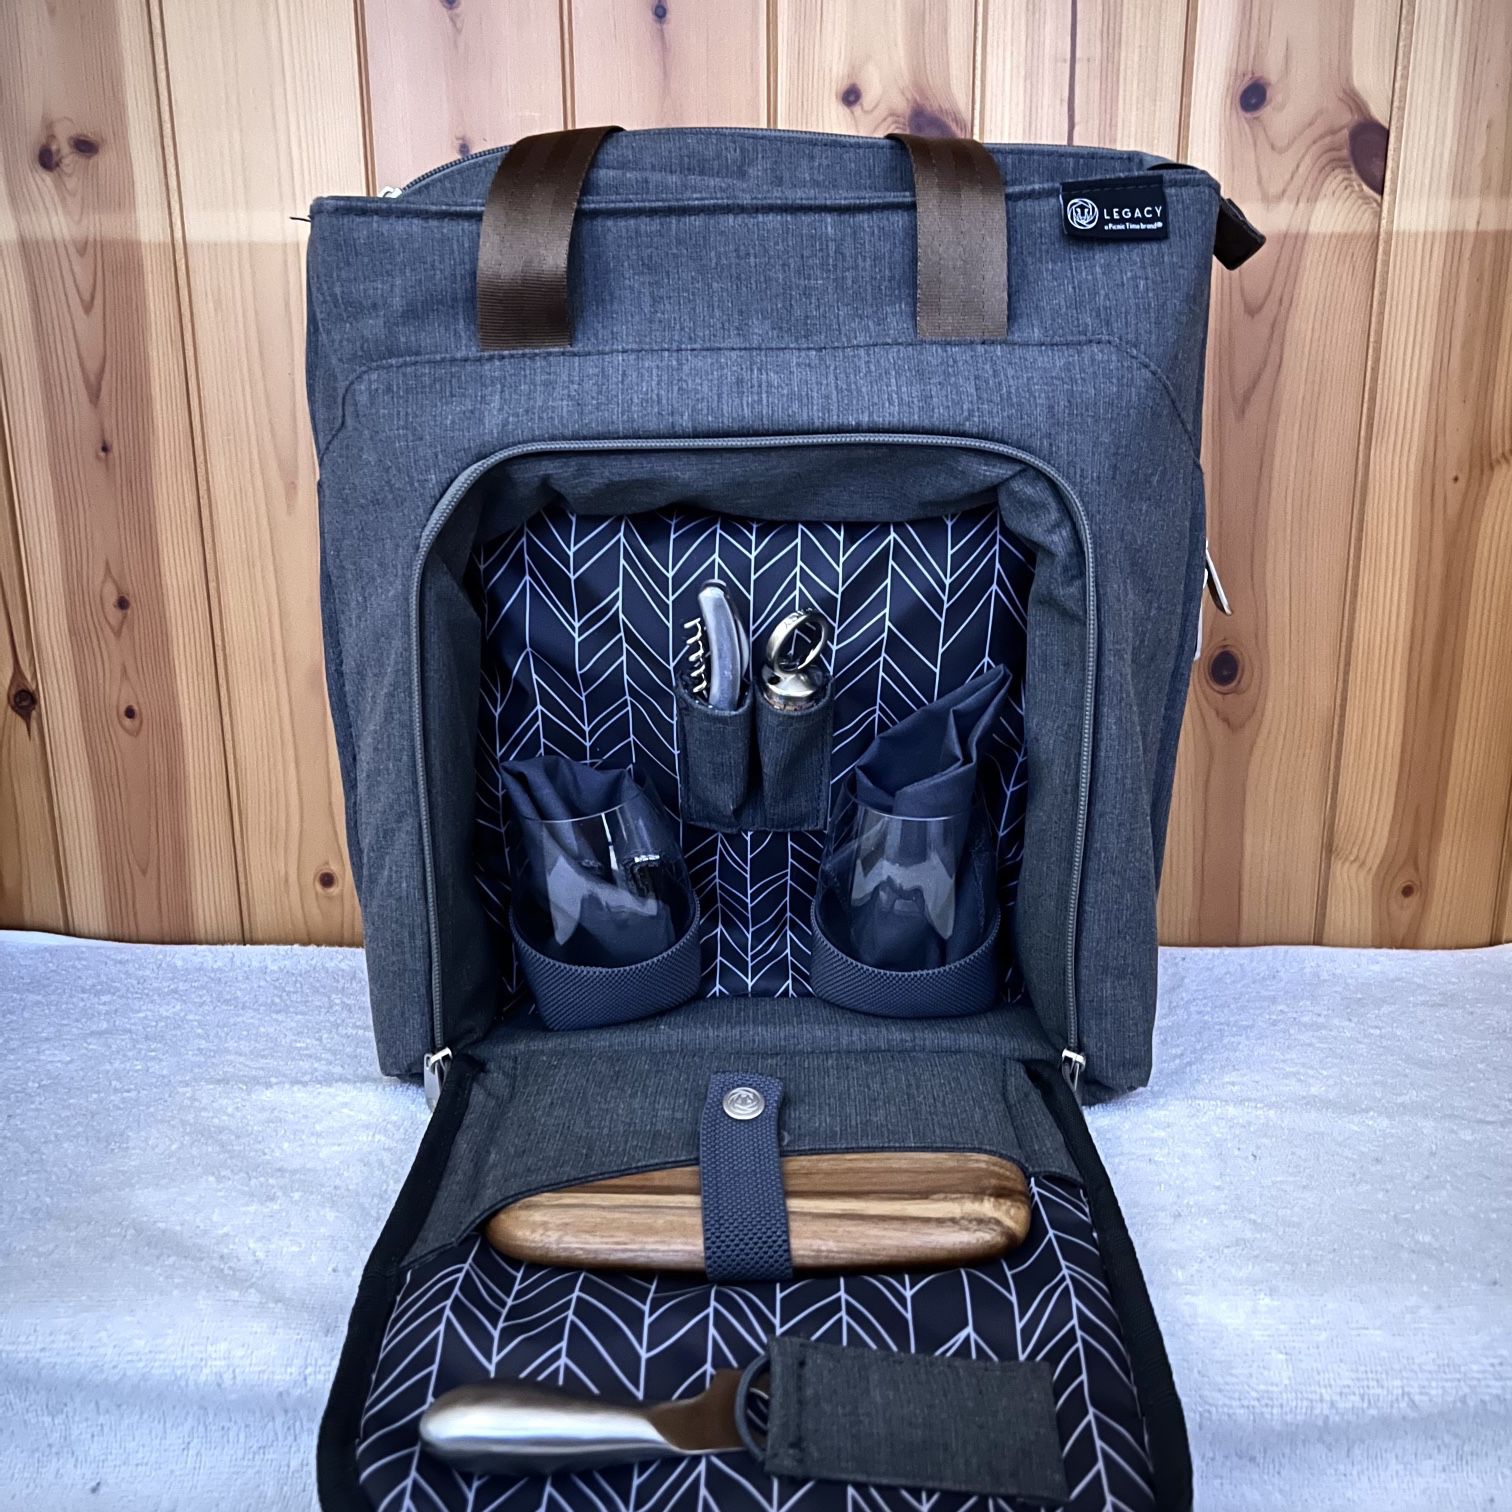 Legacy Picnic Cooler Bag For Two W Blanket